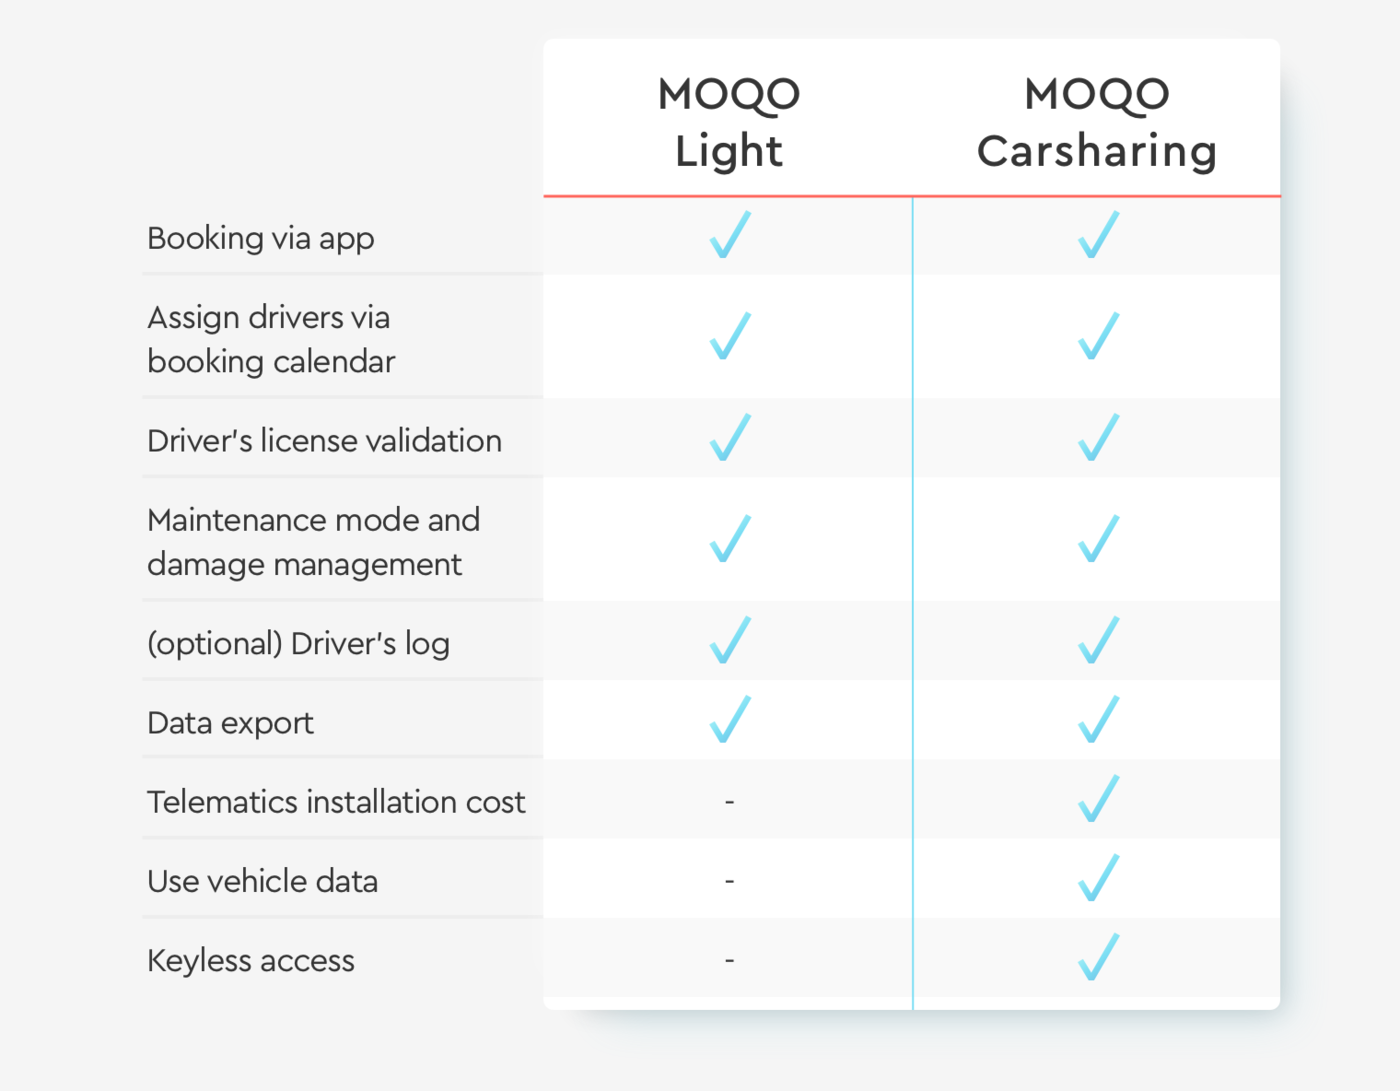 MOQO Light in Comparison to different Products